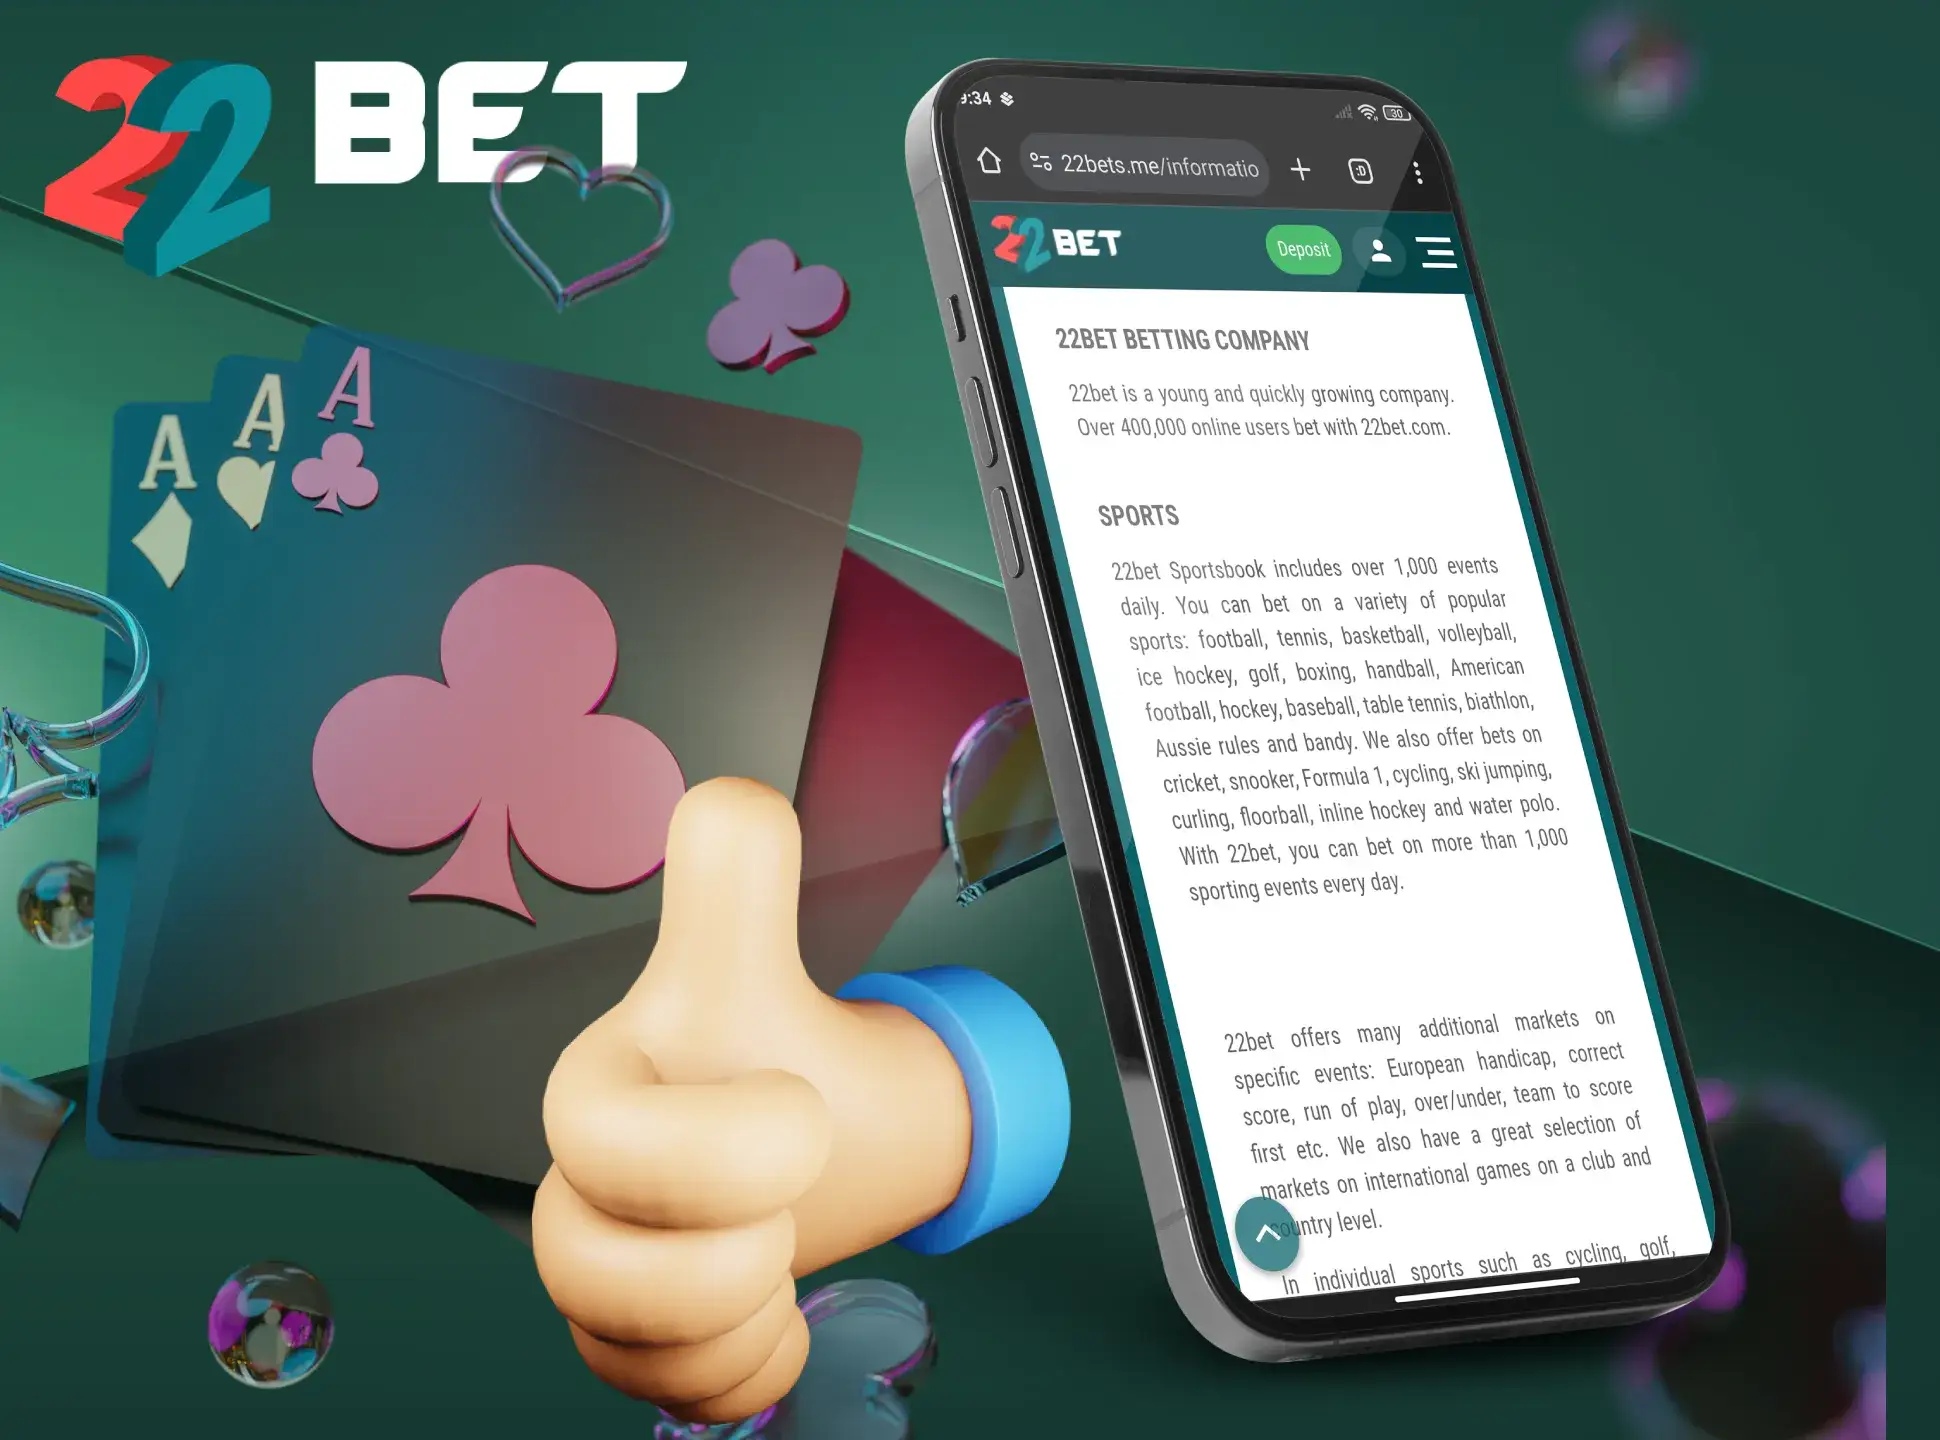 To increase your bets on winnings, use tips and lifehacks from 22Bet.